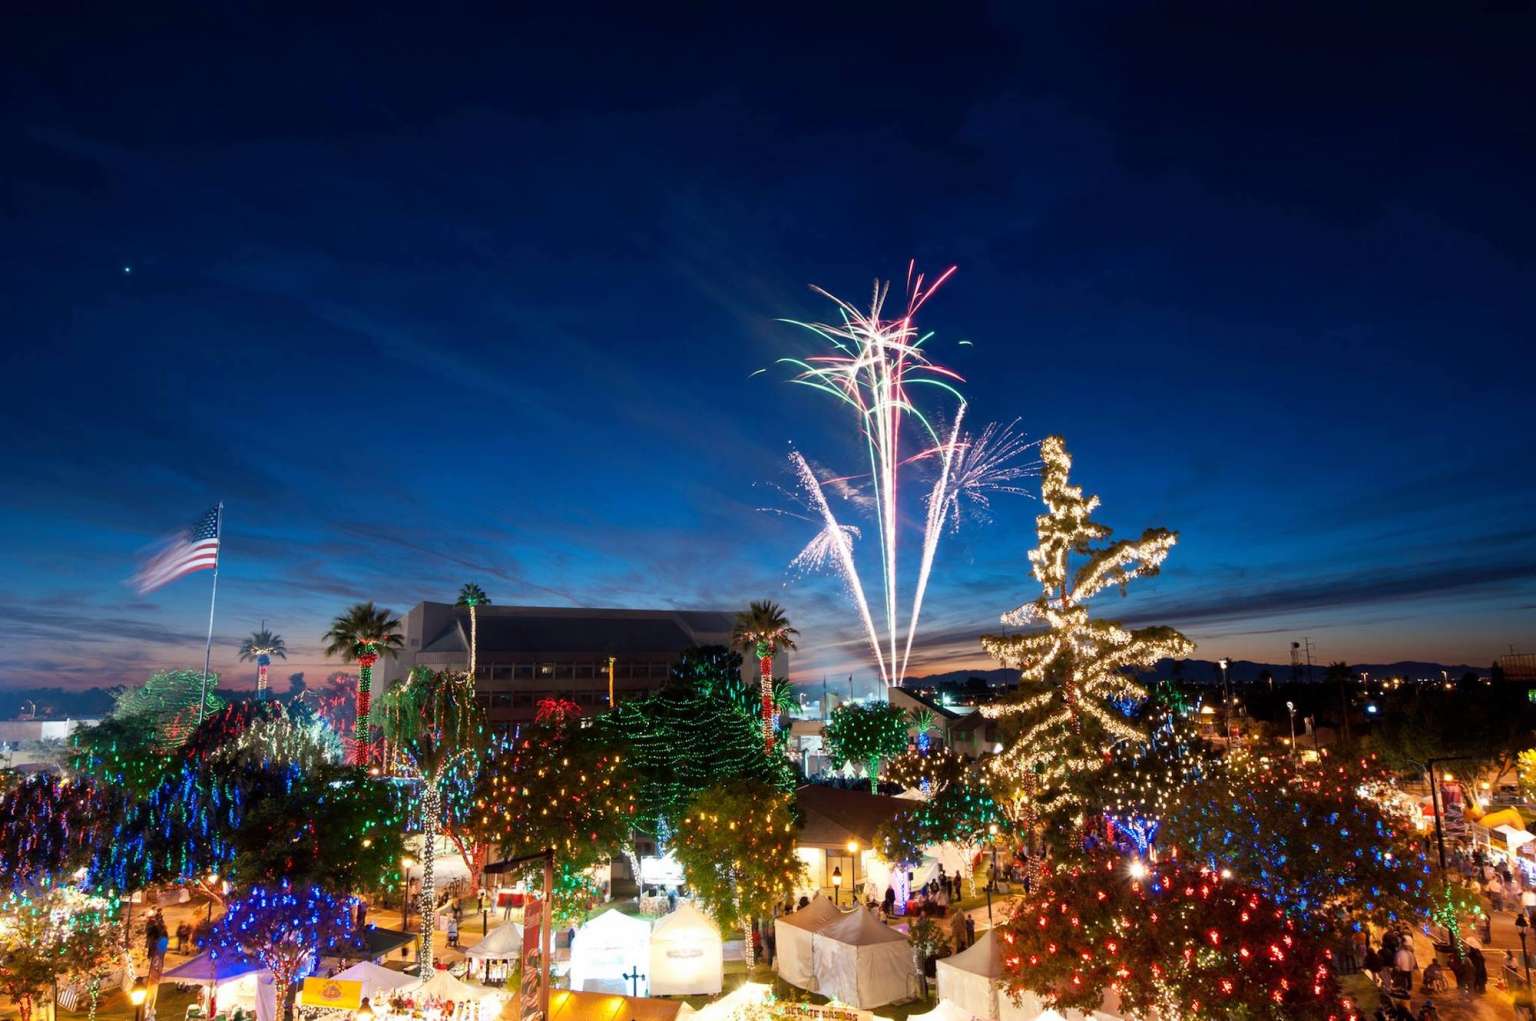 places to visit in phoenix in december